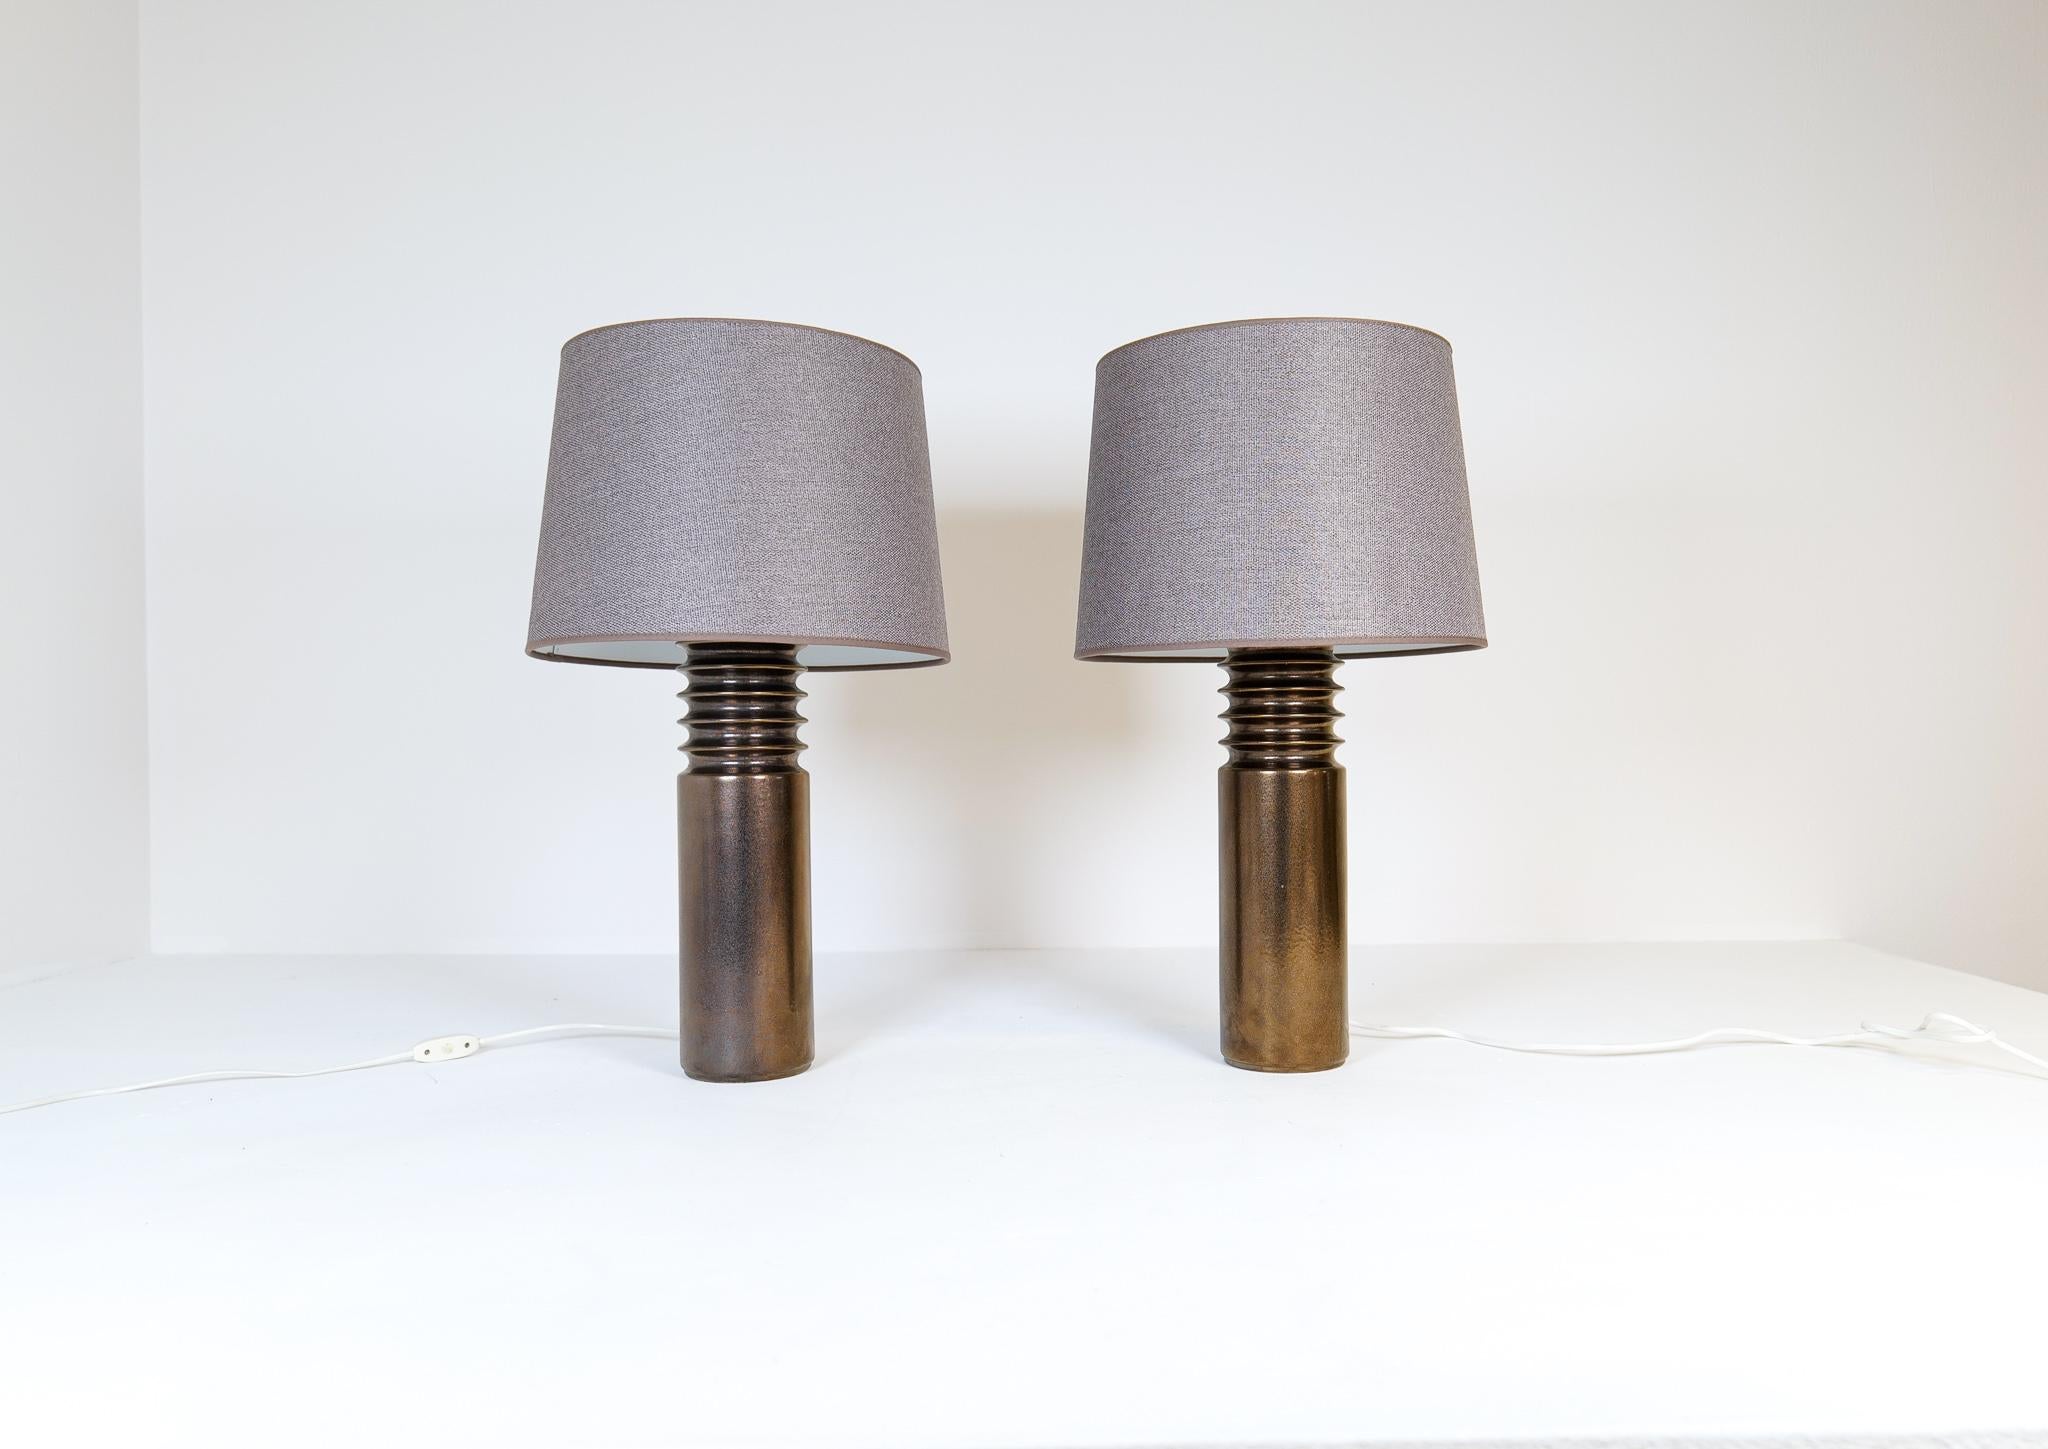 These Mid-Century Modern table lamps were manufactured in Sweden for Luxus. 
The lamps made in a bronze/gold colored ceramic with all new quality shades made in Sweden. 
Sculptural and typical look of the early 1970s Sweden on these table